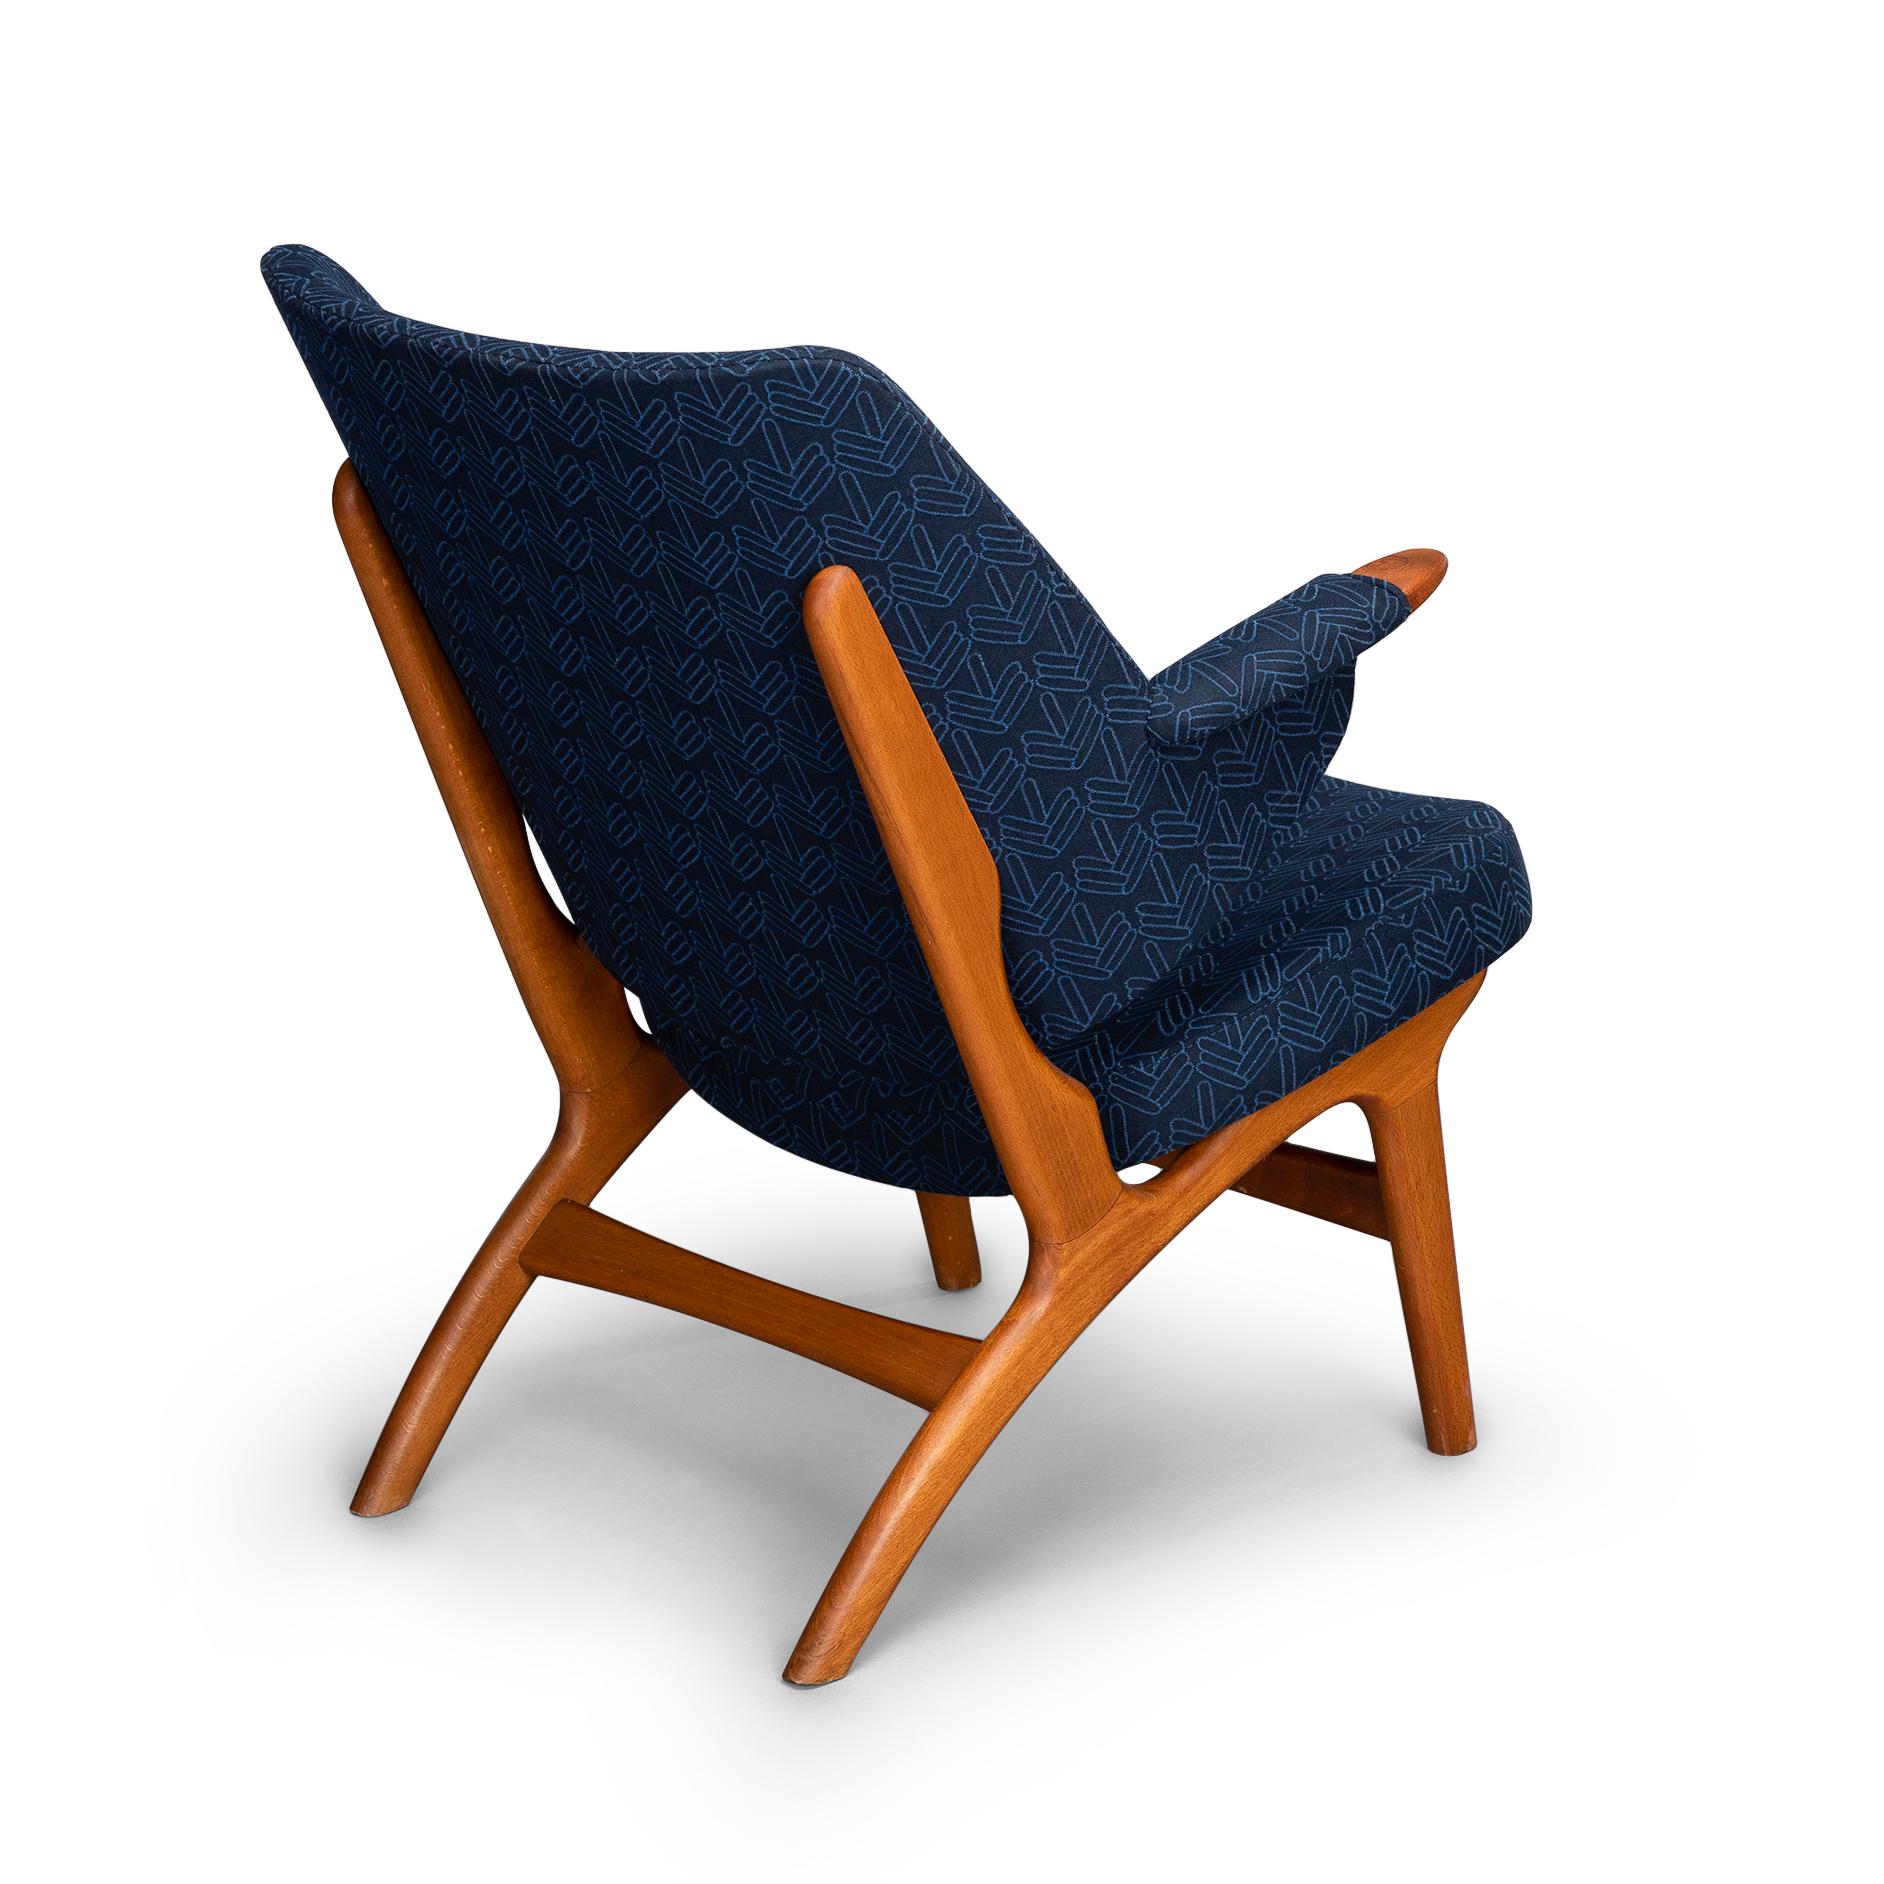 Very rare armchair designed and made by Poul Hundevad in the mid-1950s. This #14L relax chair with low back is ergonomically a dream come true and very comfortable. The chair has a marvelously crafted base out of oak and teak arm rests. Upholstery